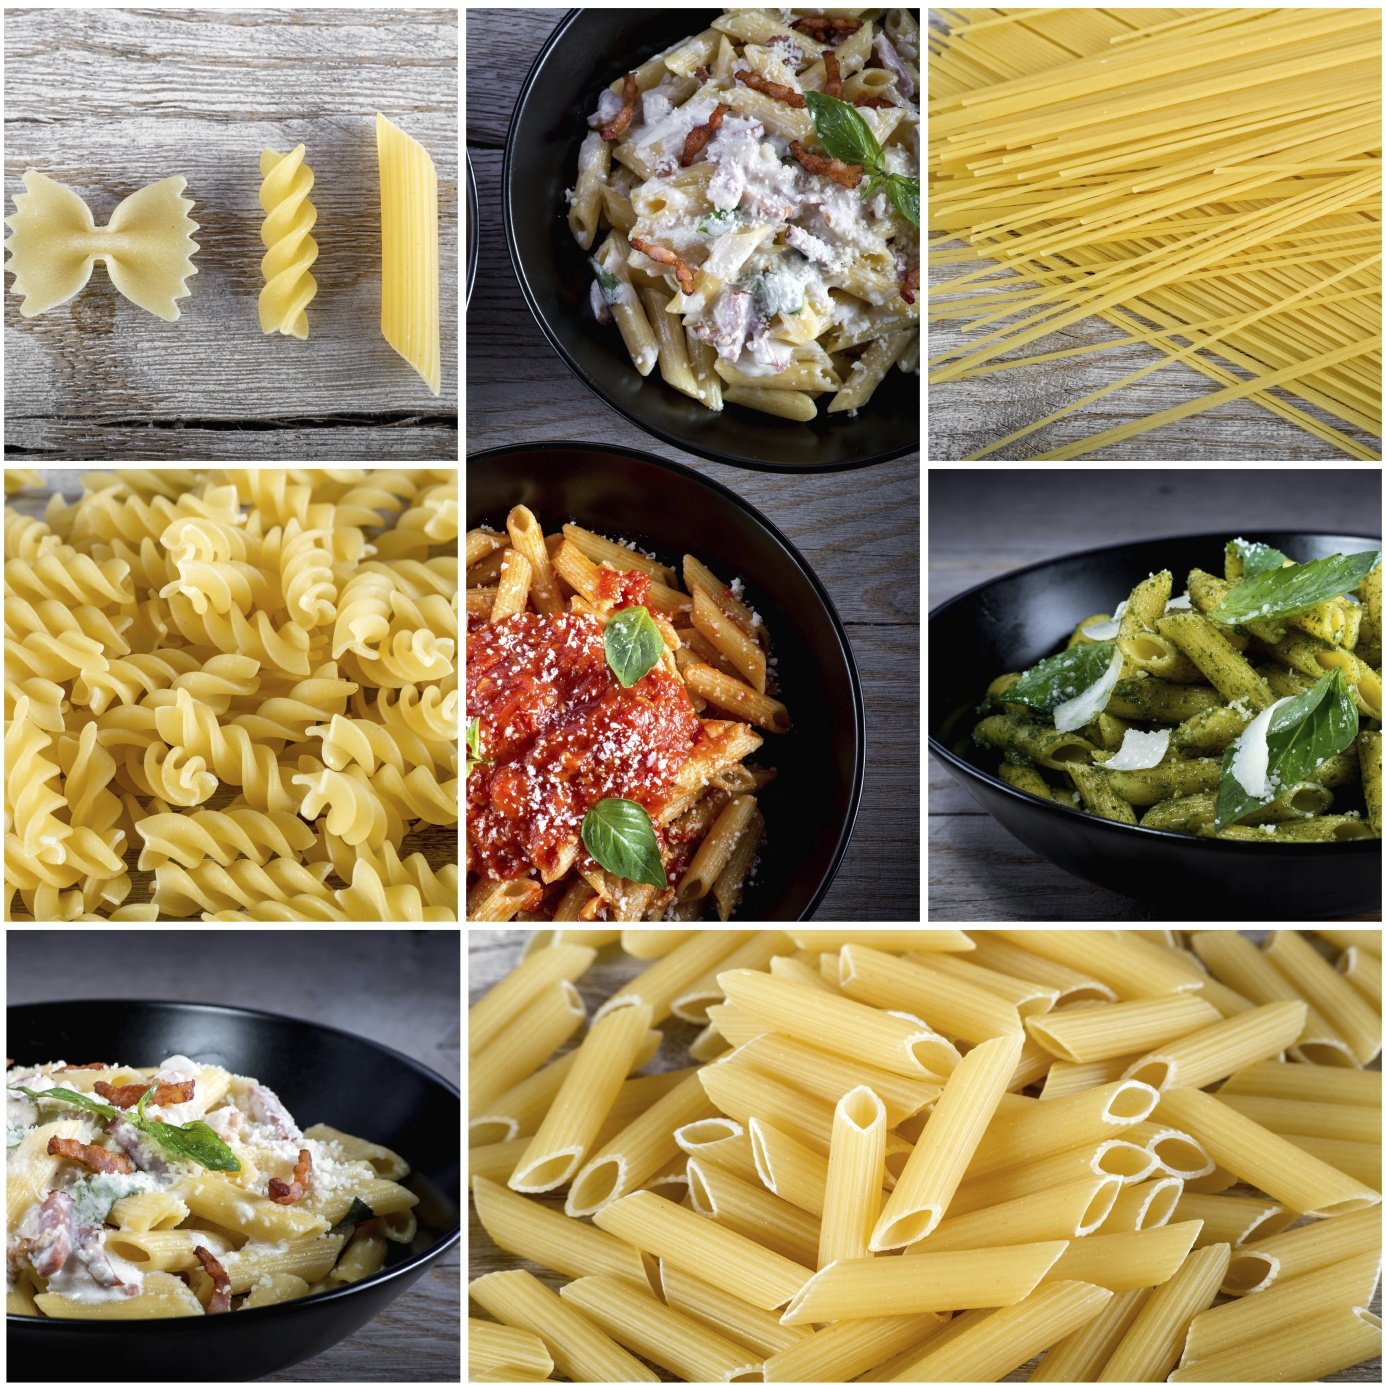 Powered by Pasta: 5 Delicious, Simple, and Veggie Packed Pasta Dishes